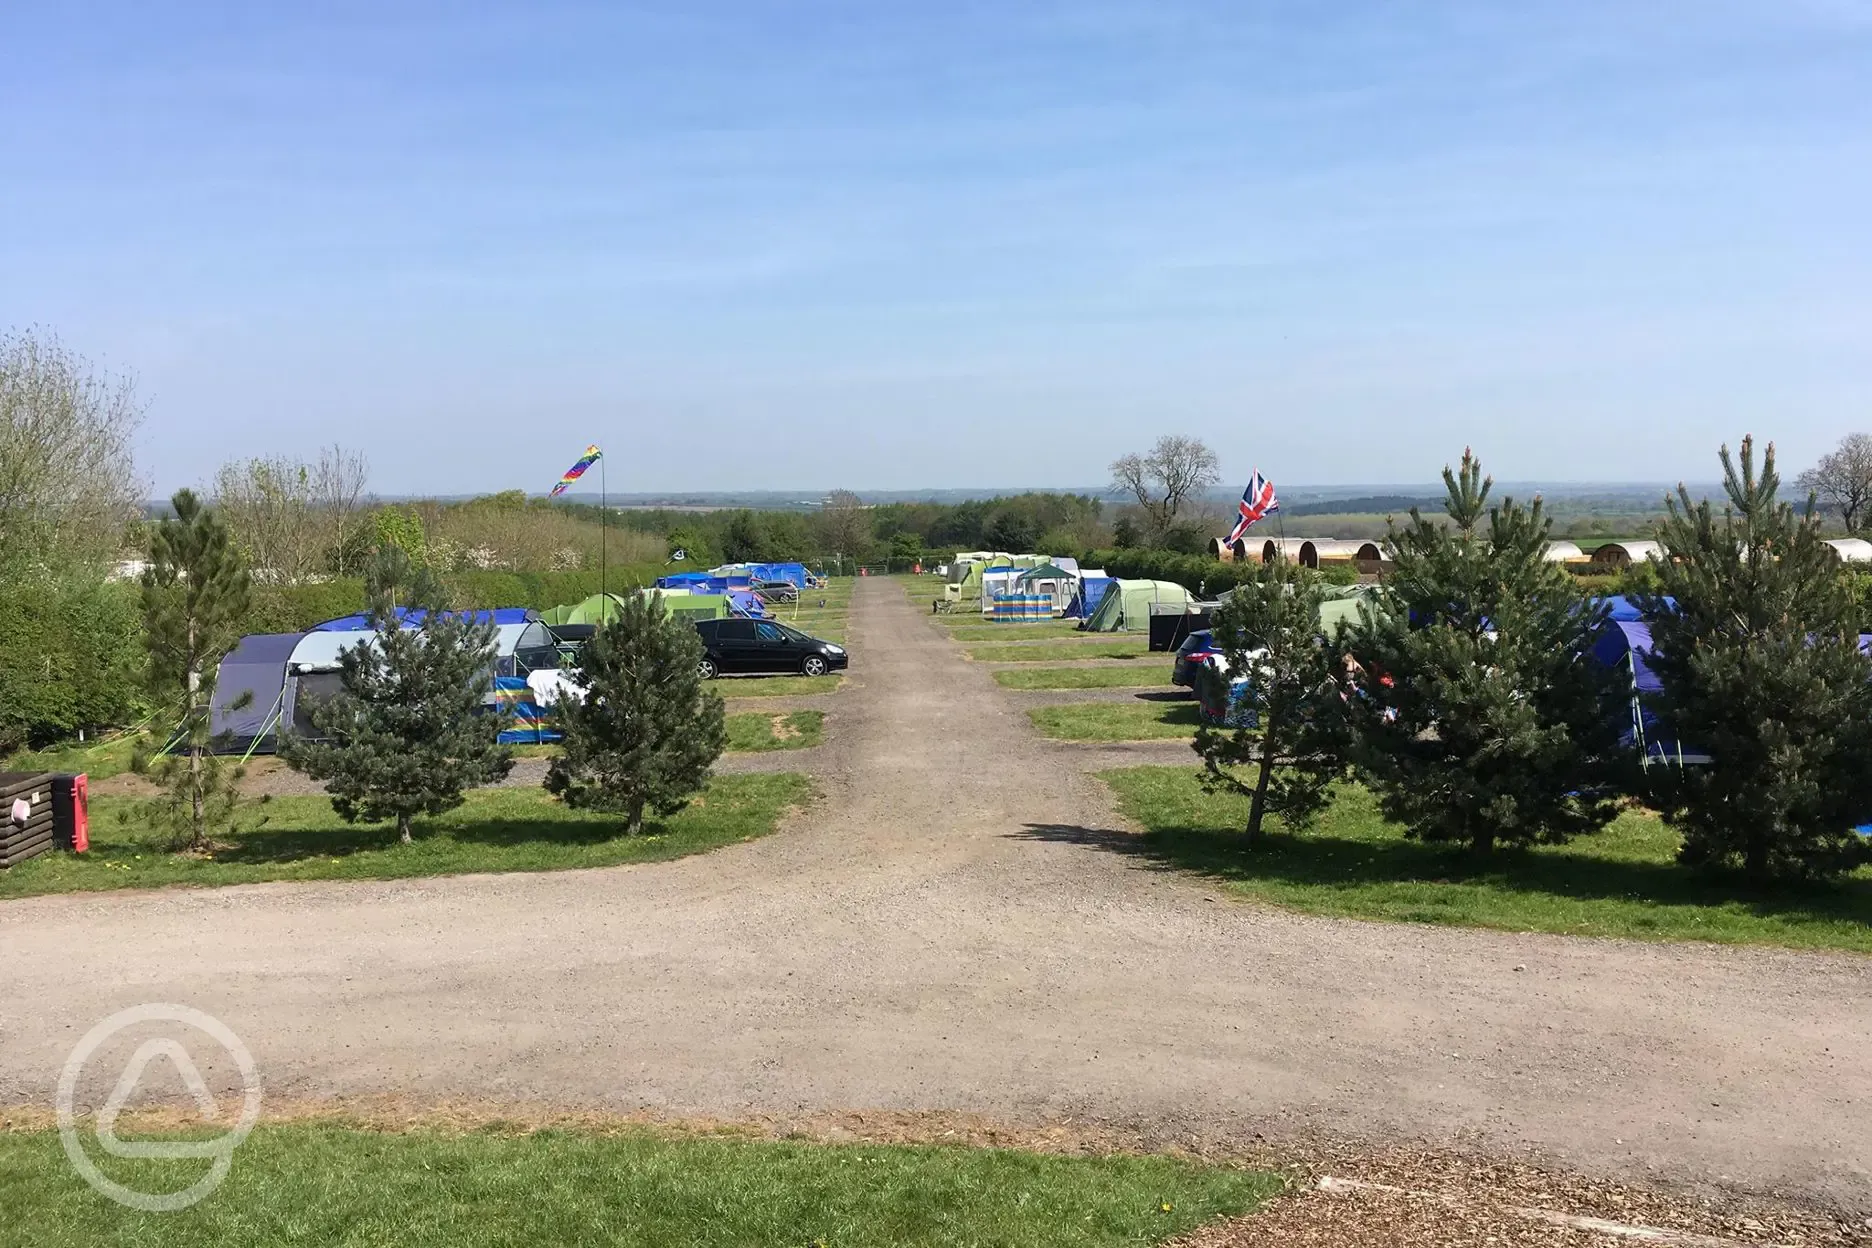 Overview of the fully serviced touring pitches